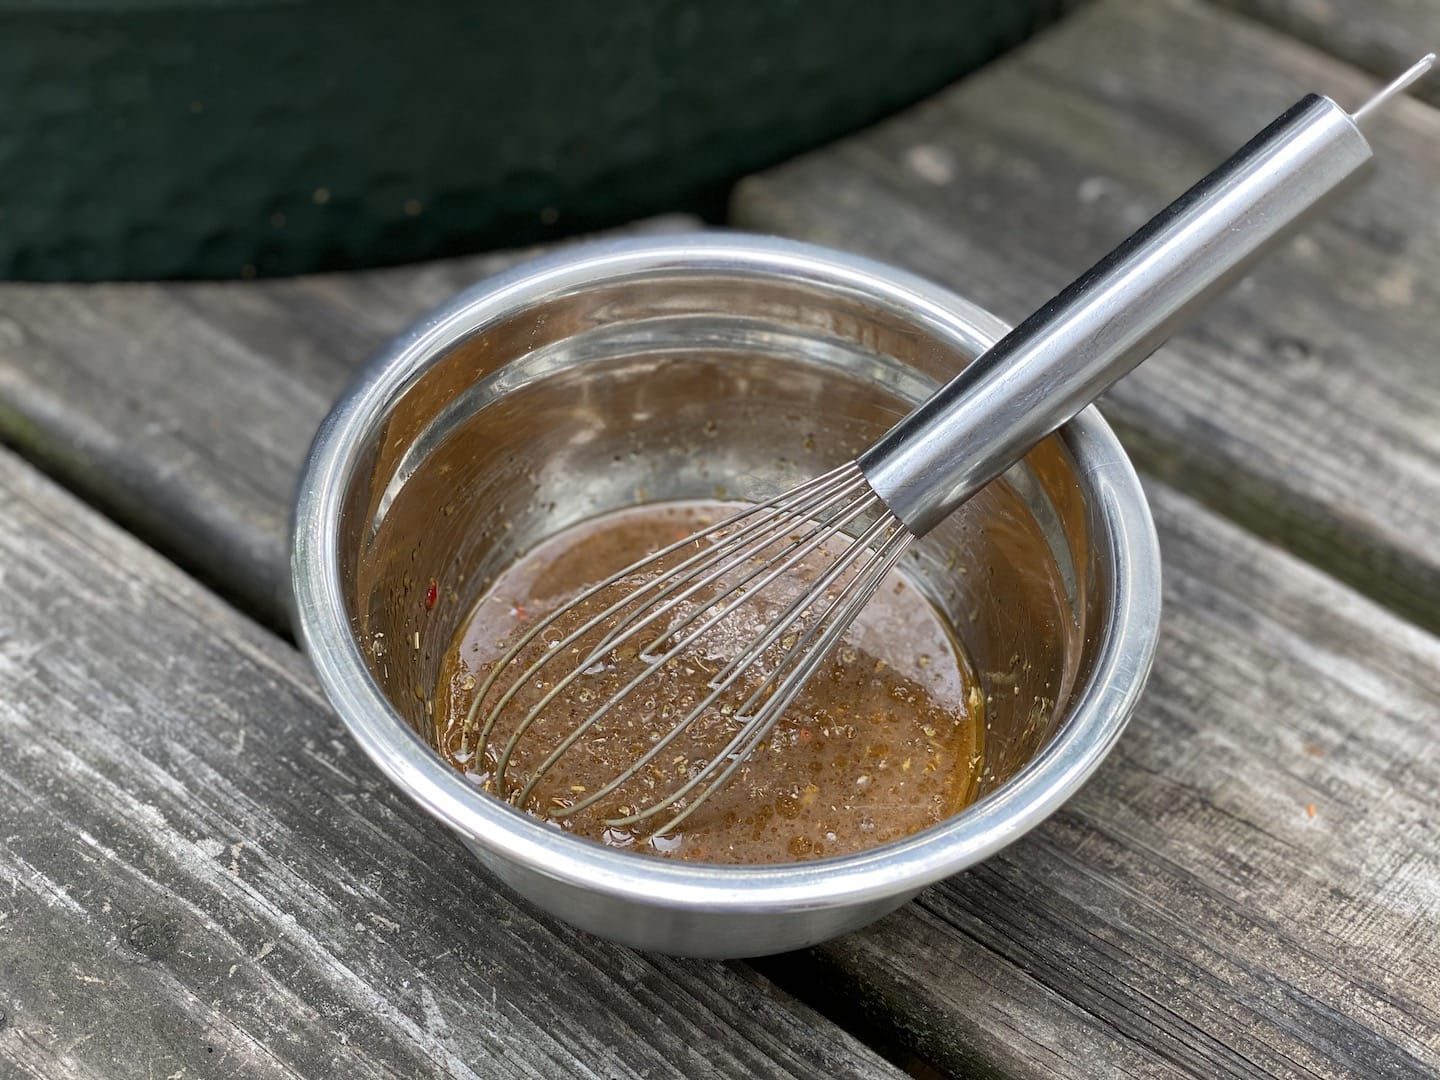 marinade with a whisk in a metal mixing bowl on a rough wood table